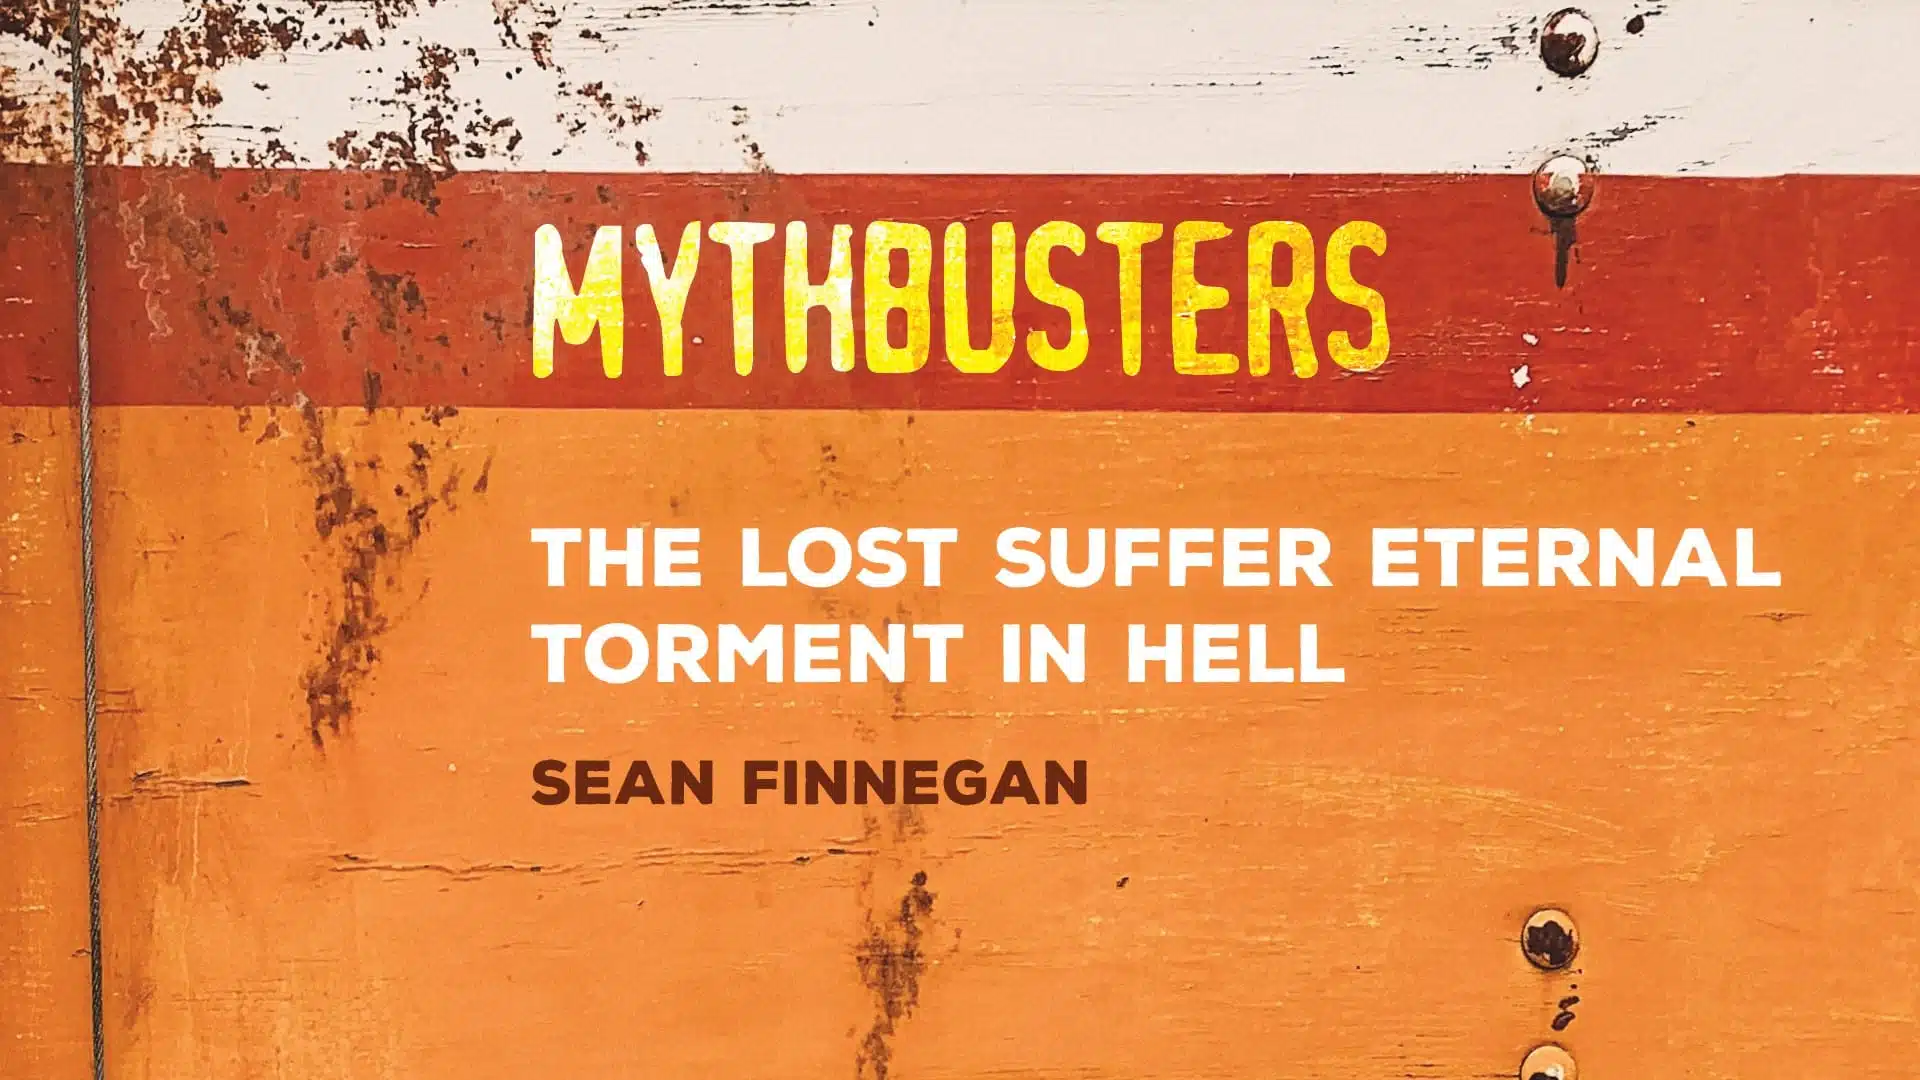 Myth: The Lost Suffer Eternal Torment in Hell